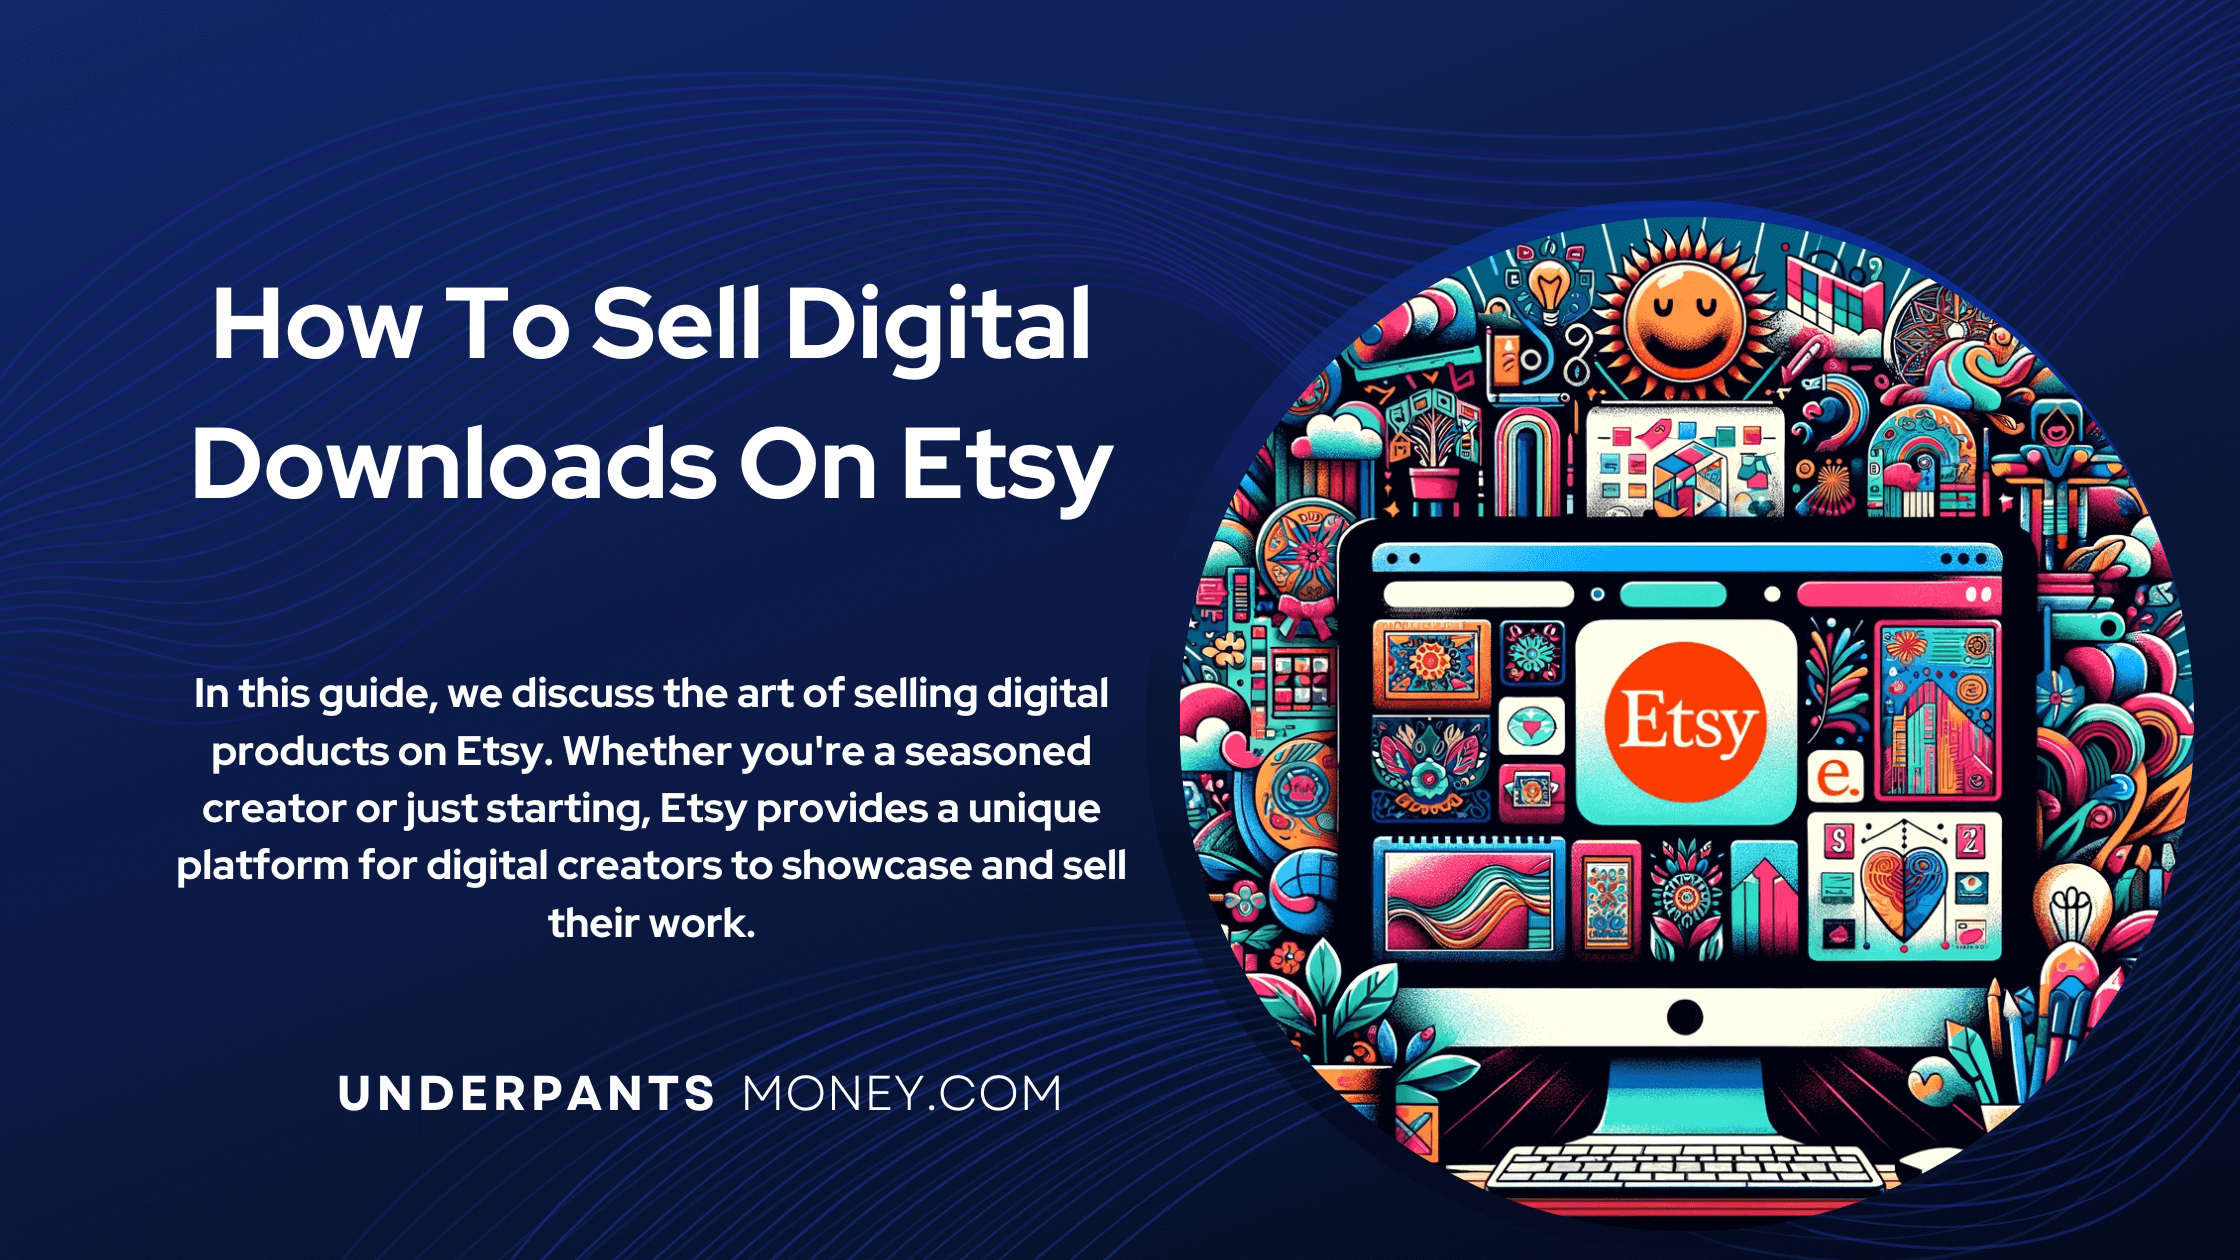 How to sell digital downloads on etsy title with subtext on blue with a collage of etsy products to the right